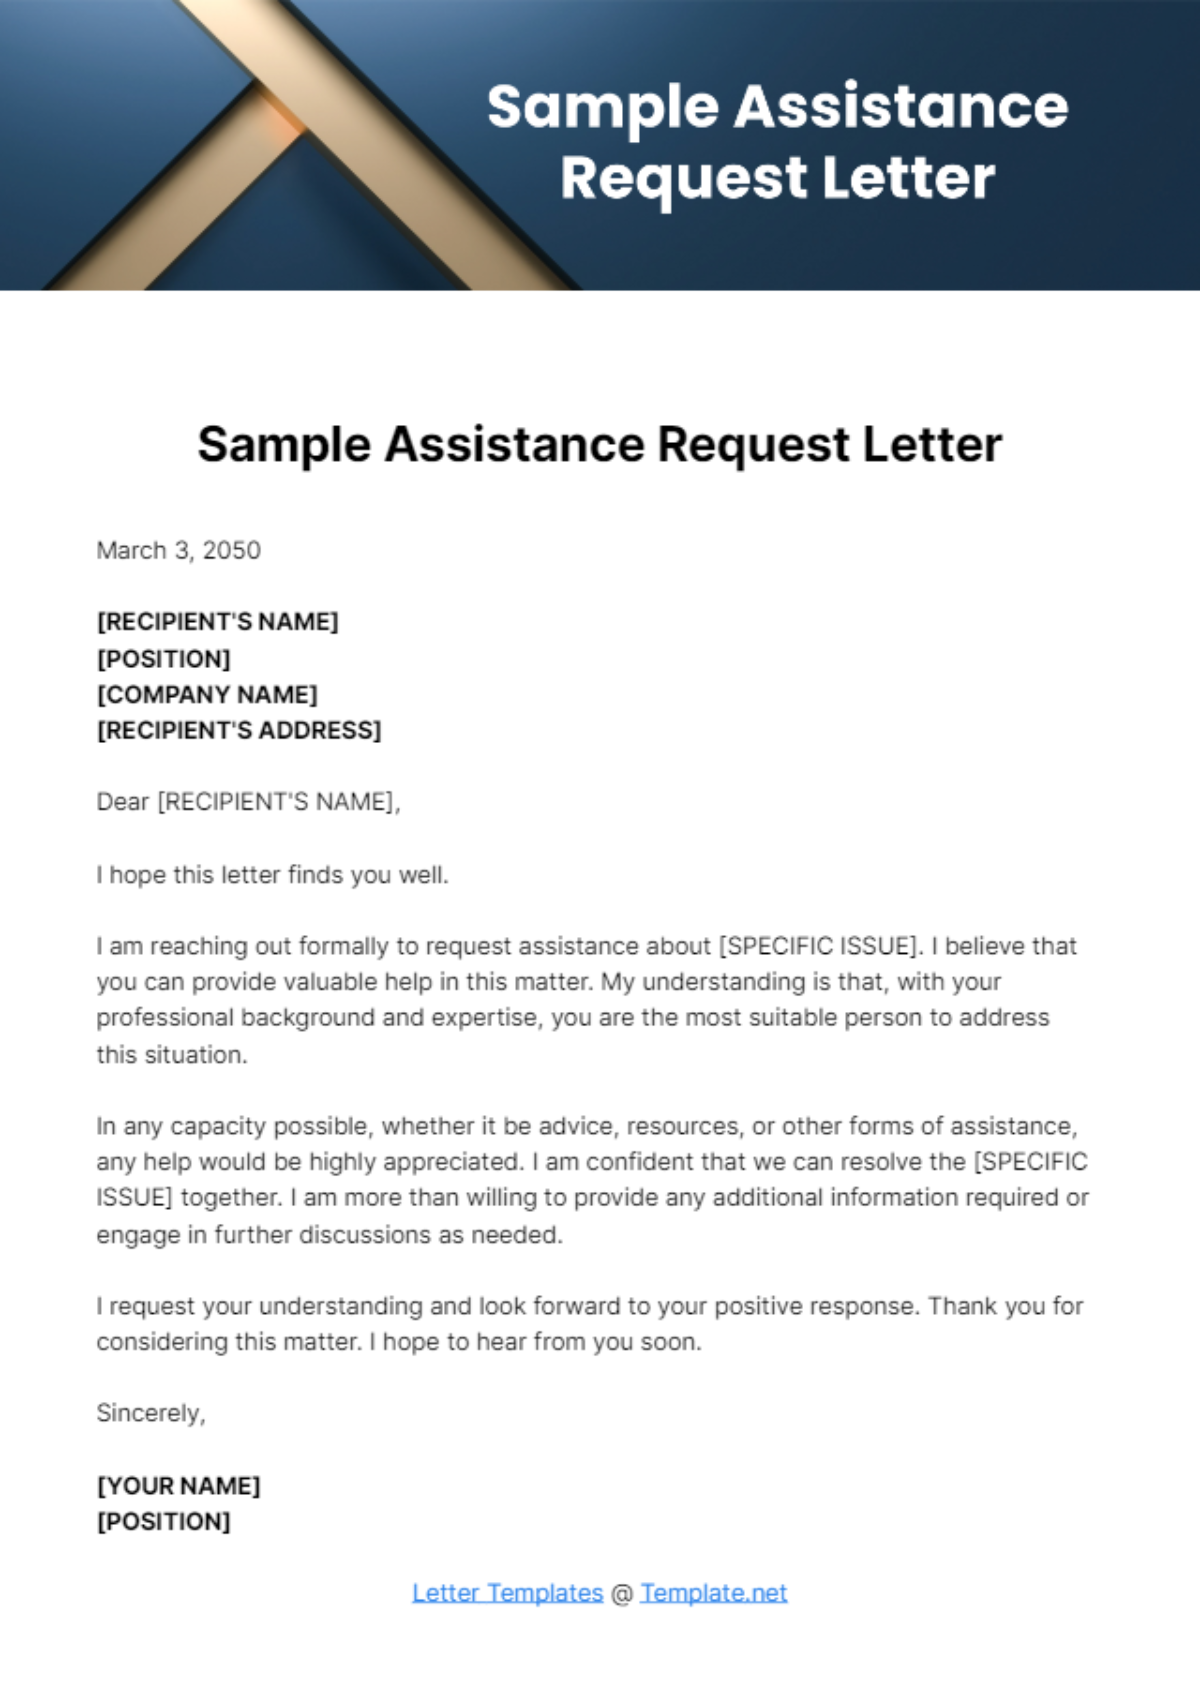 Free Sample Assistance Request Letter Template